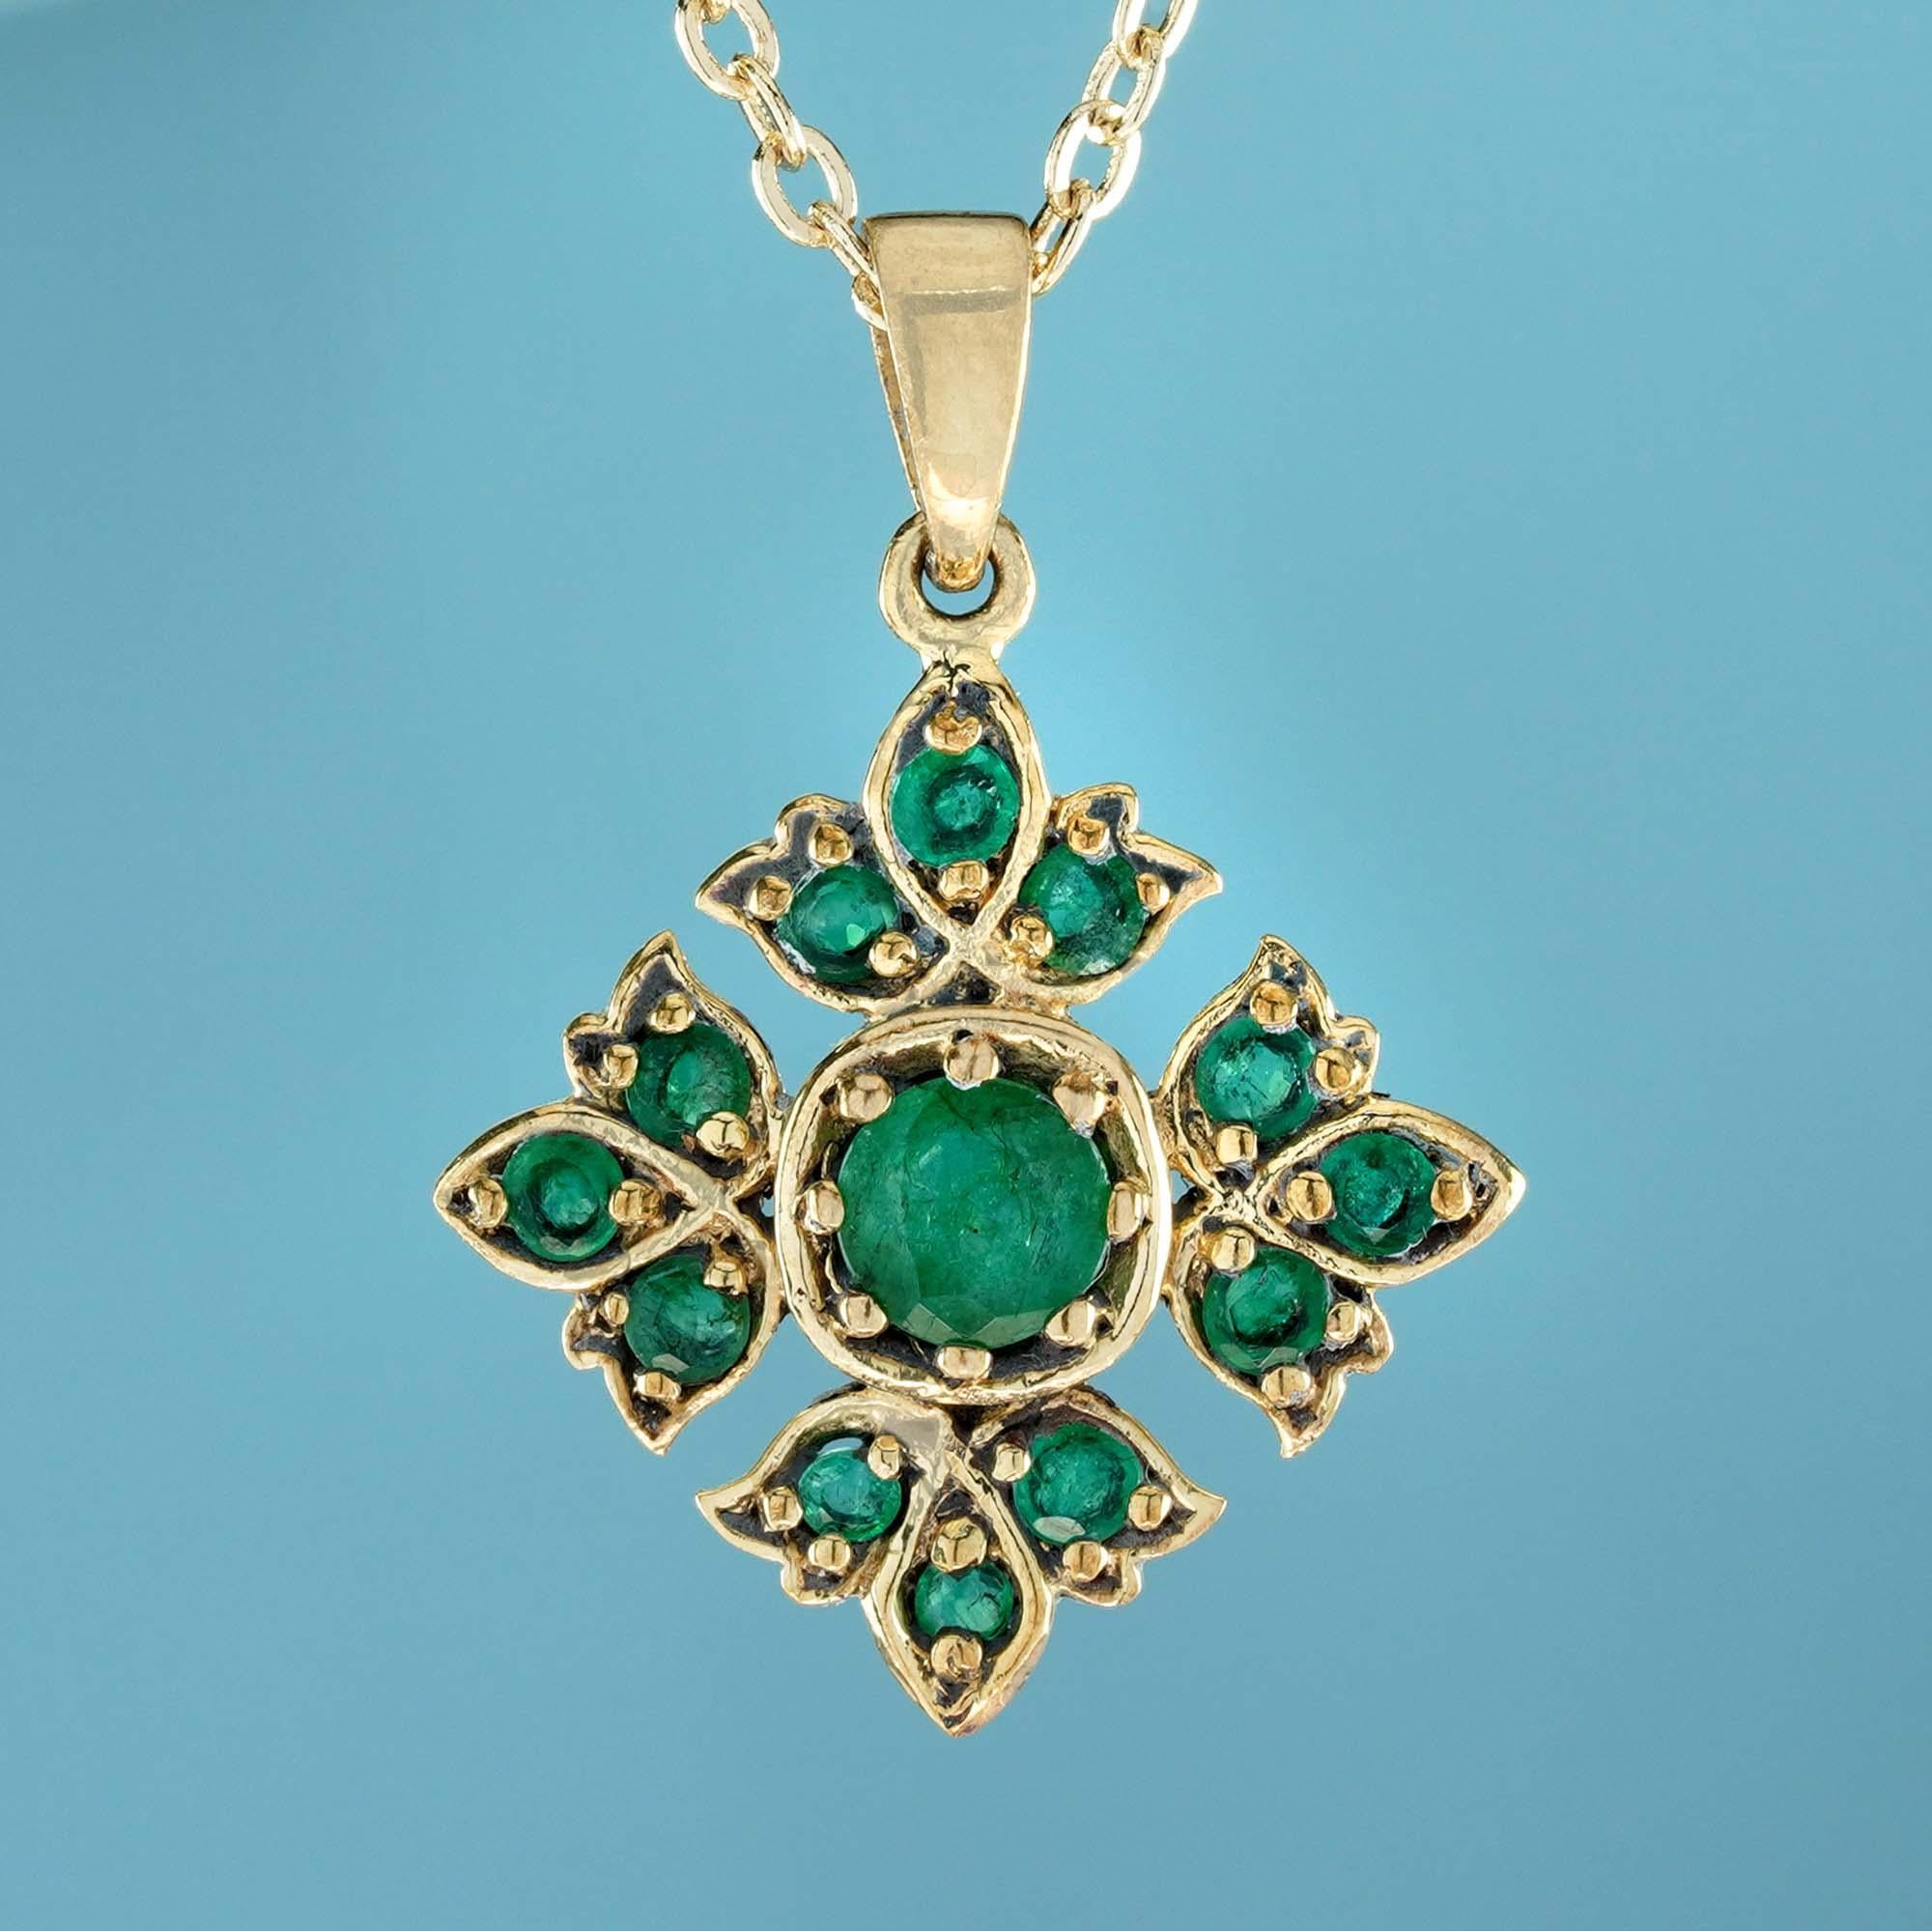 The pendant showcases clusters of four petal-shaped designs, with each petal crafted from vibrant round emeralds set in both round and marquise-shaped frames. These petals surround the central point of the flower, secured in a prong setting. The